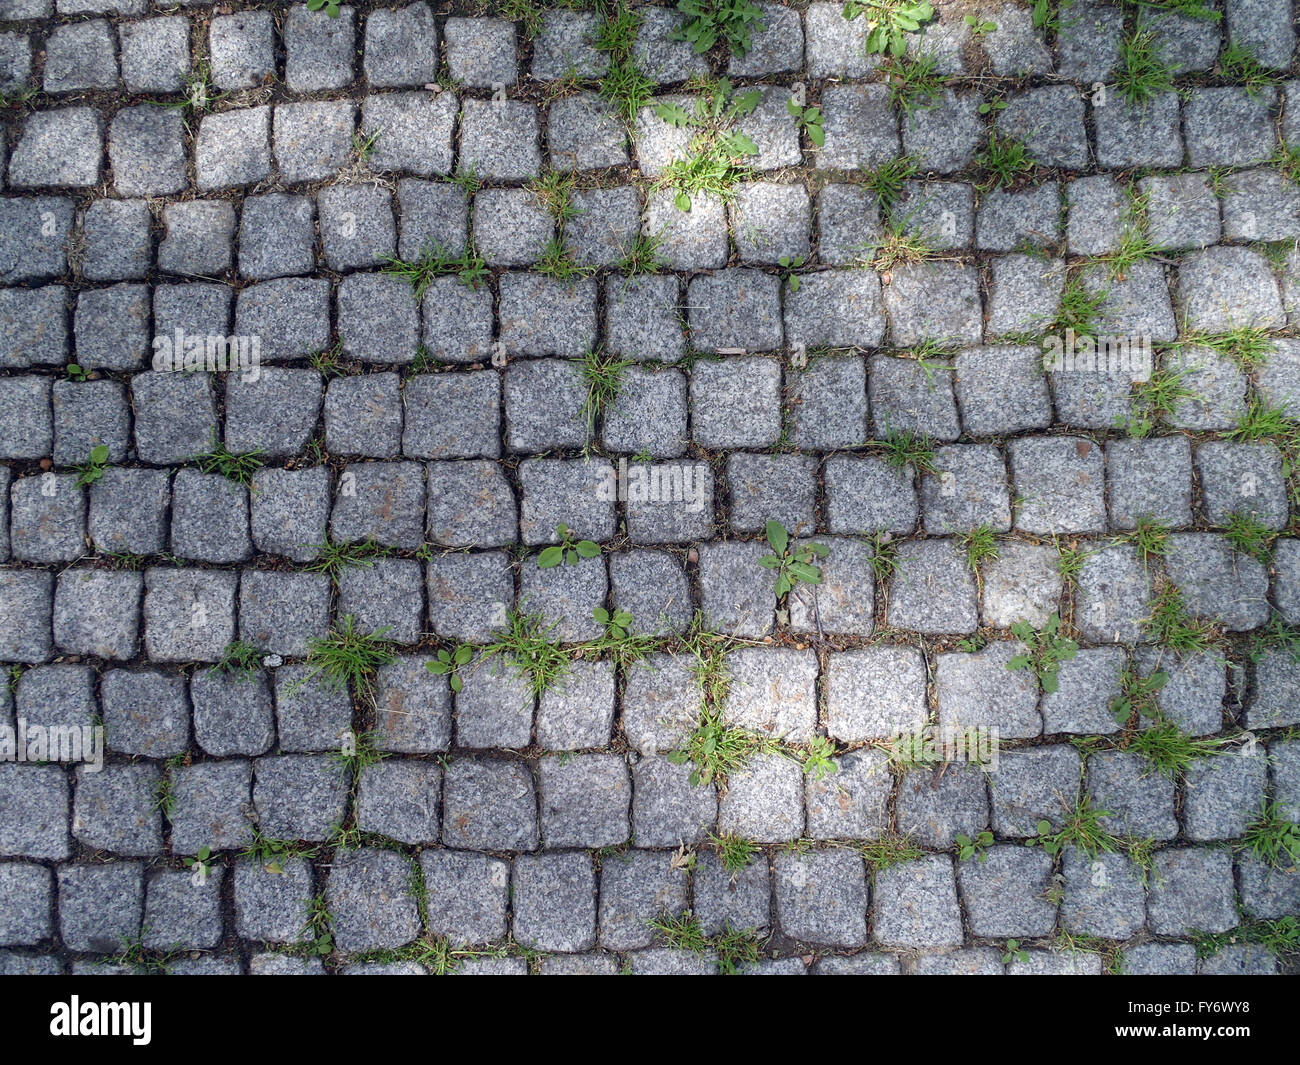 Looking down at Gray Cobble stone path with bits of grass growing Stock Photo